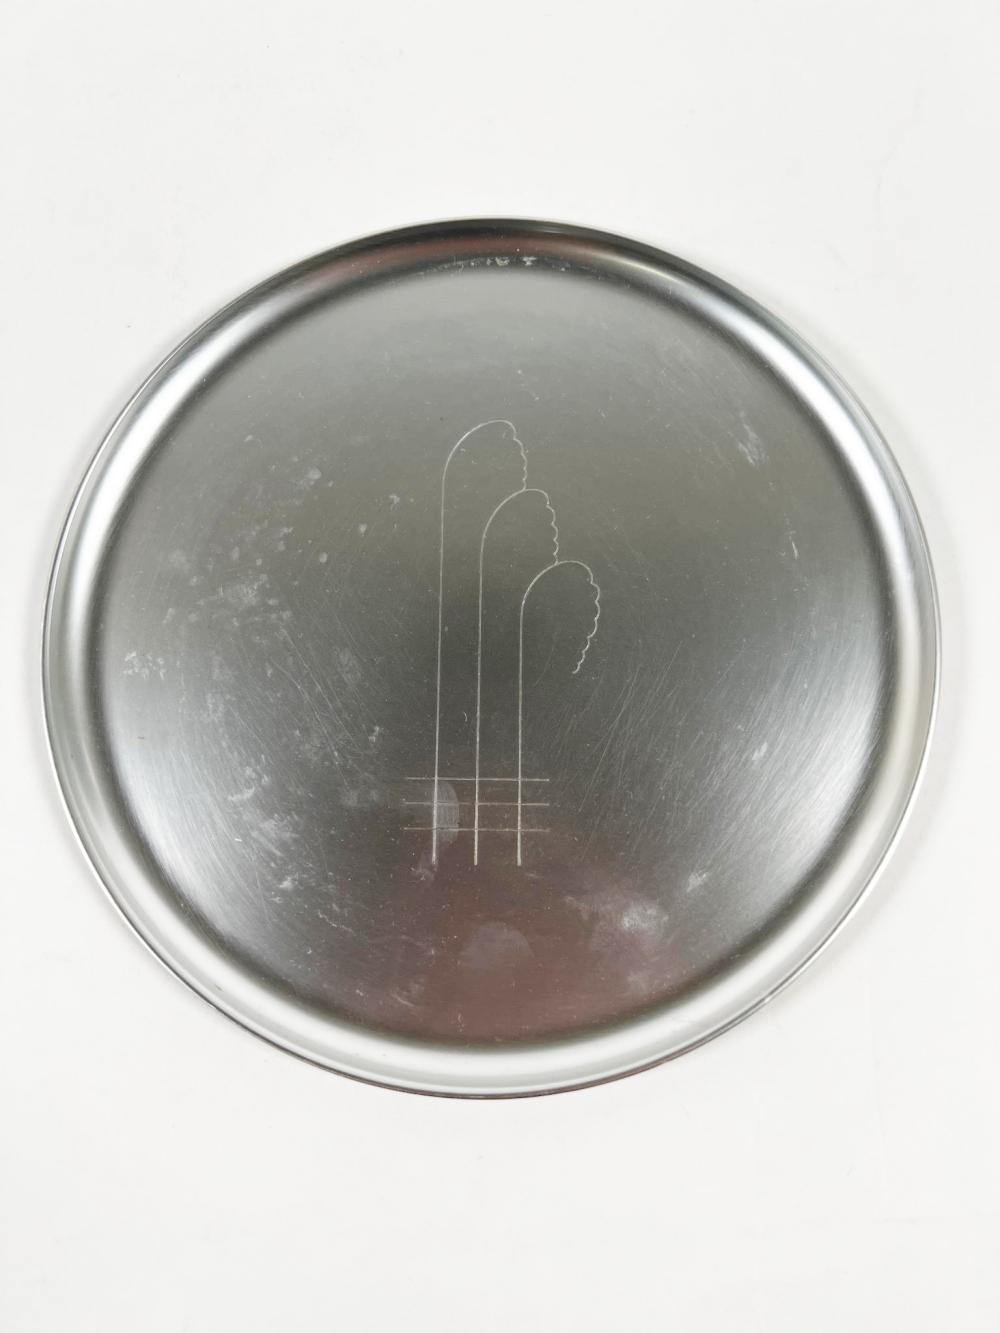 ART DECO IMPERIAL PLATE WITH LINEAR 2f335e